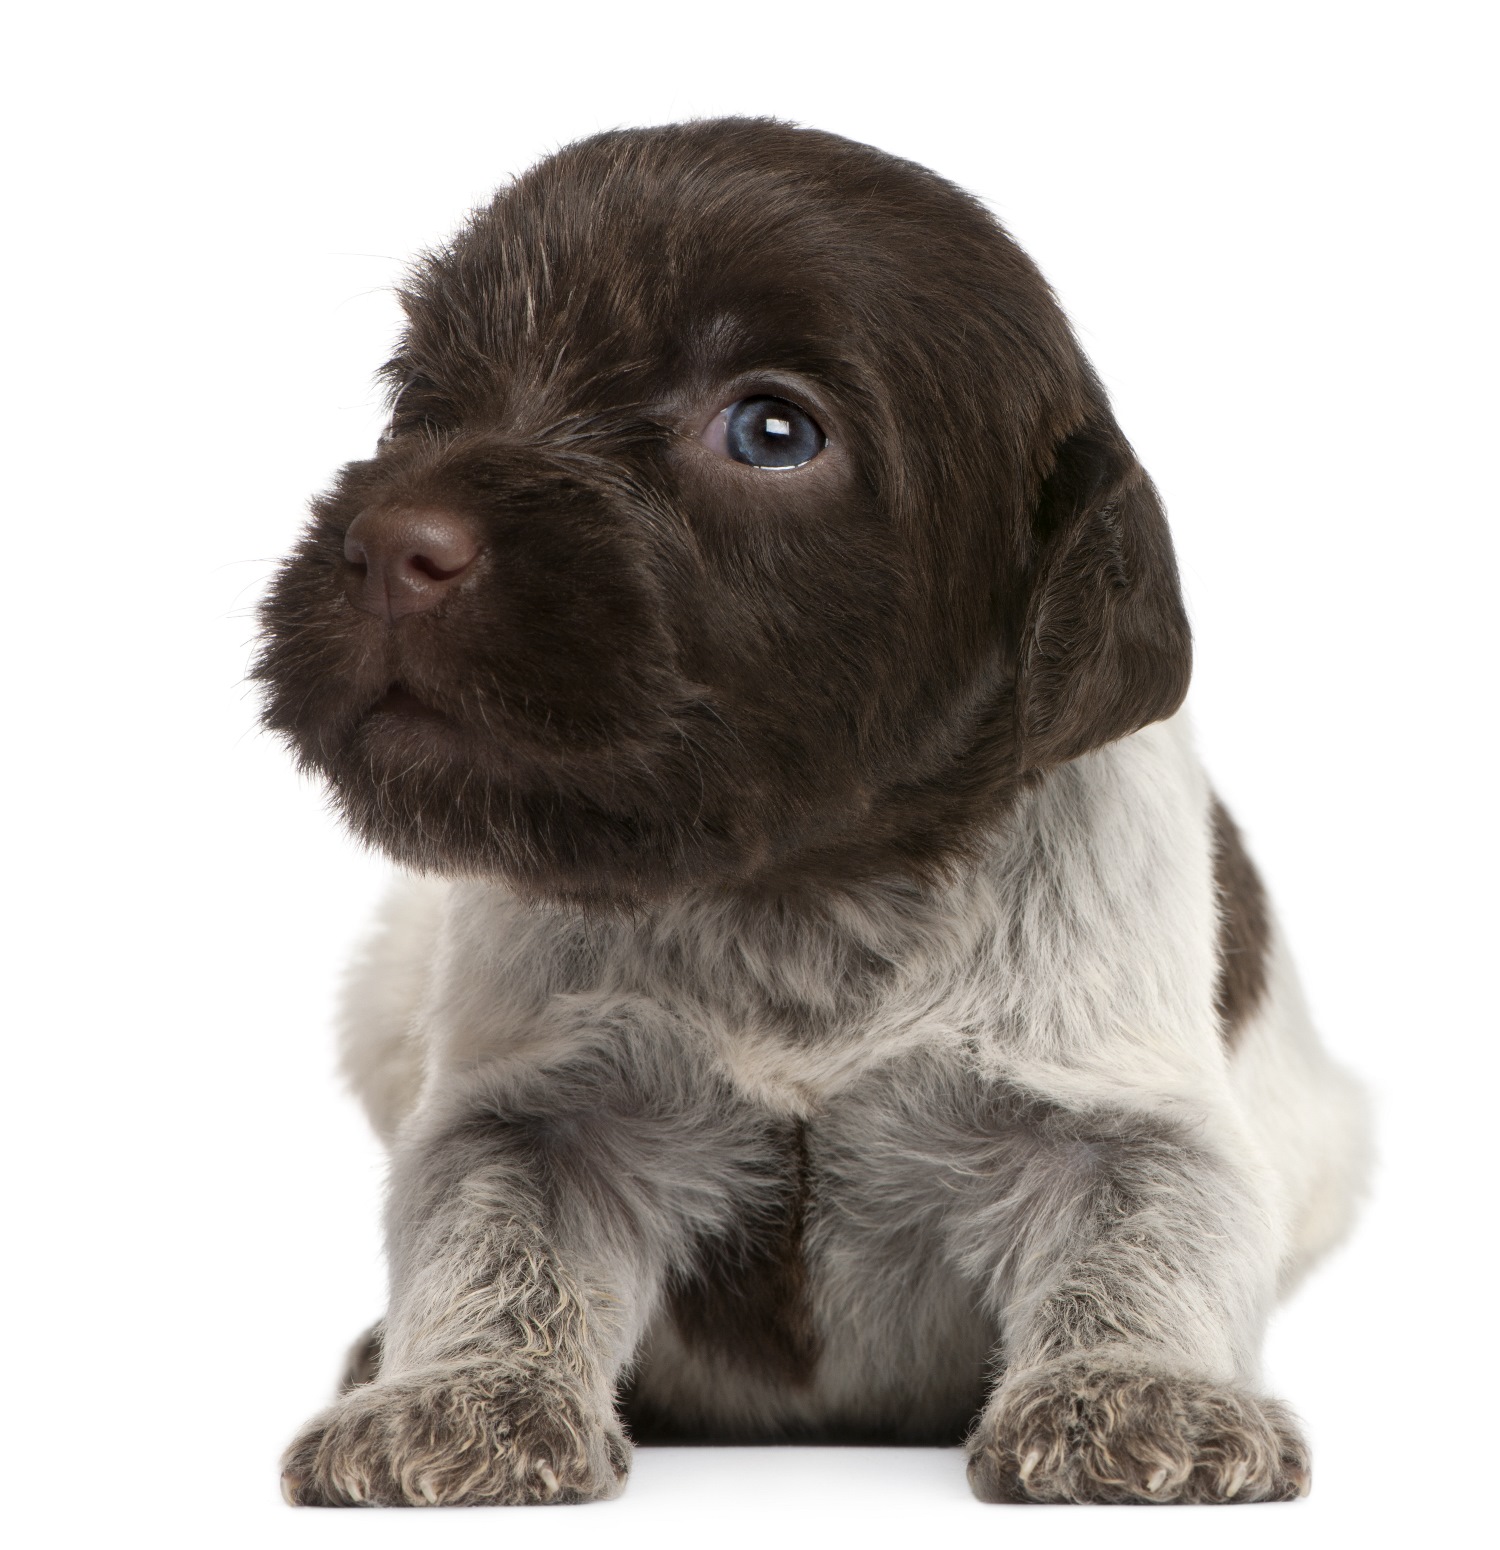 Griffon-Korthals-Wirehaired Pointing Griffon puppy (1 months old)